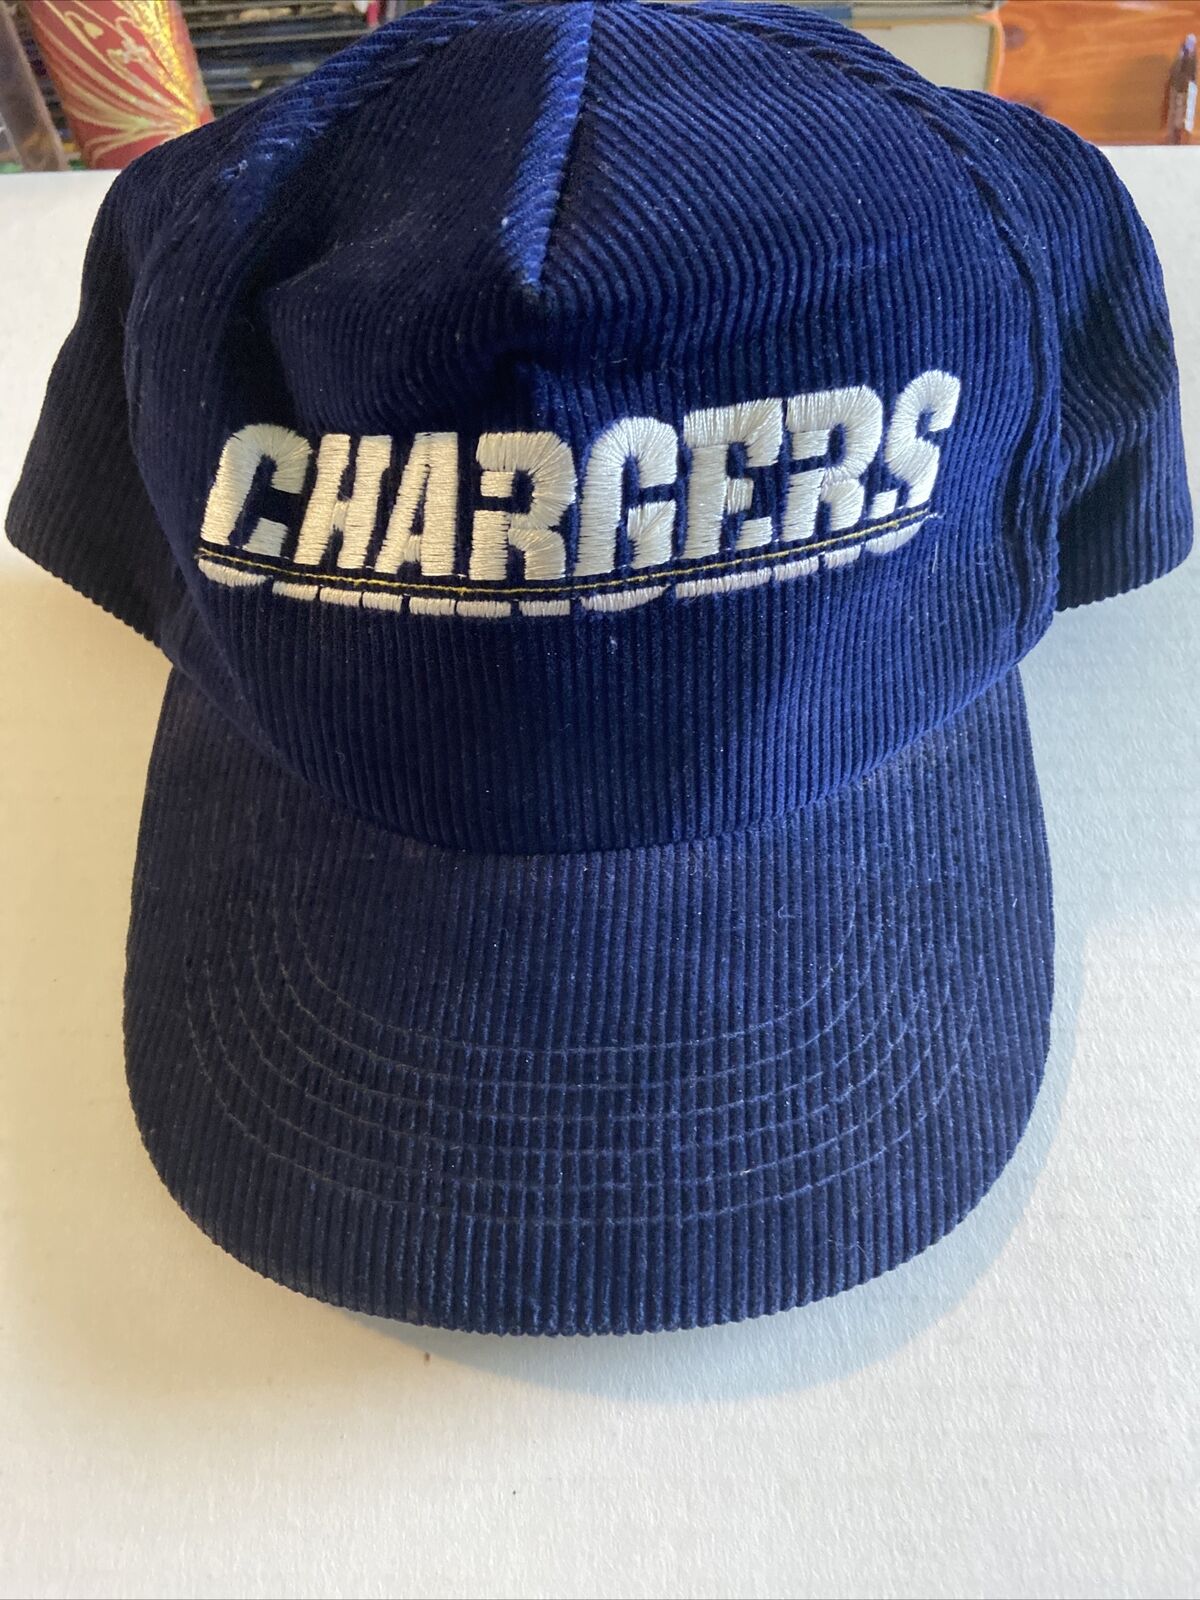 retro chargers hat